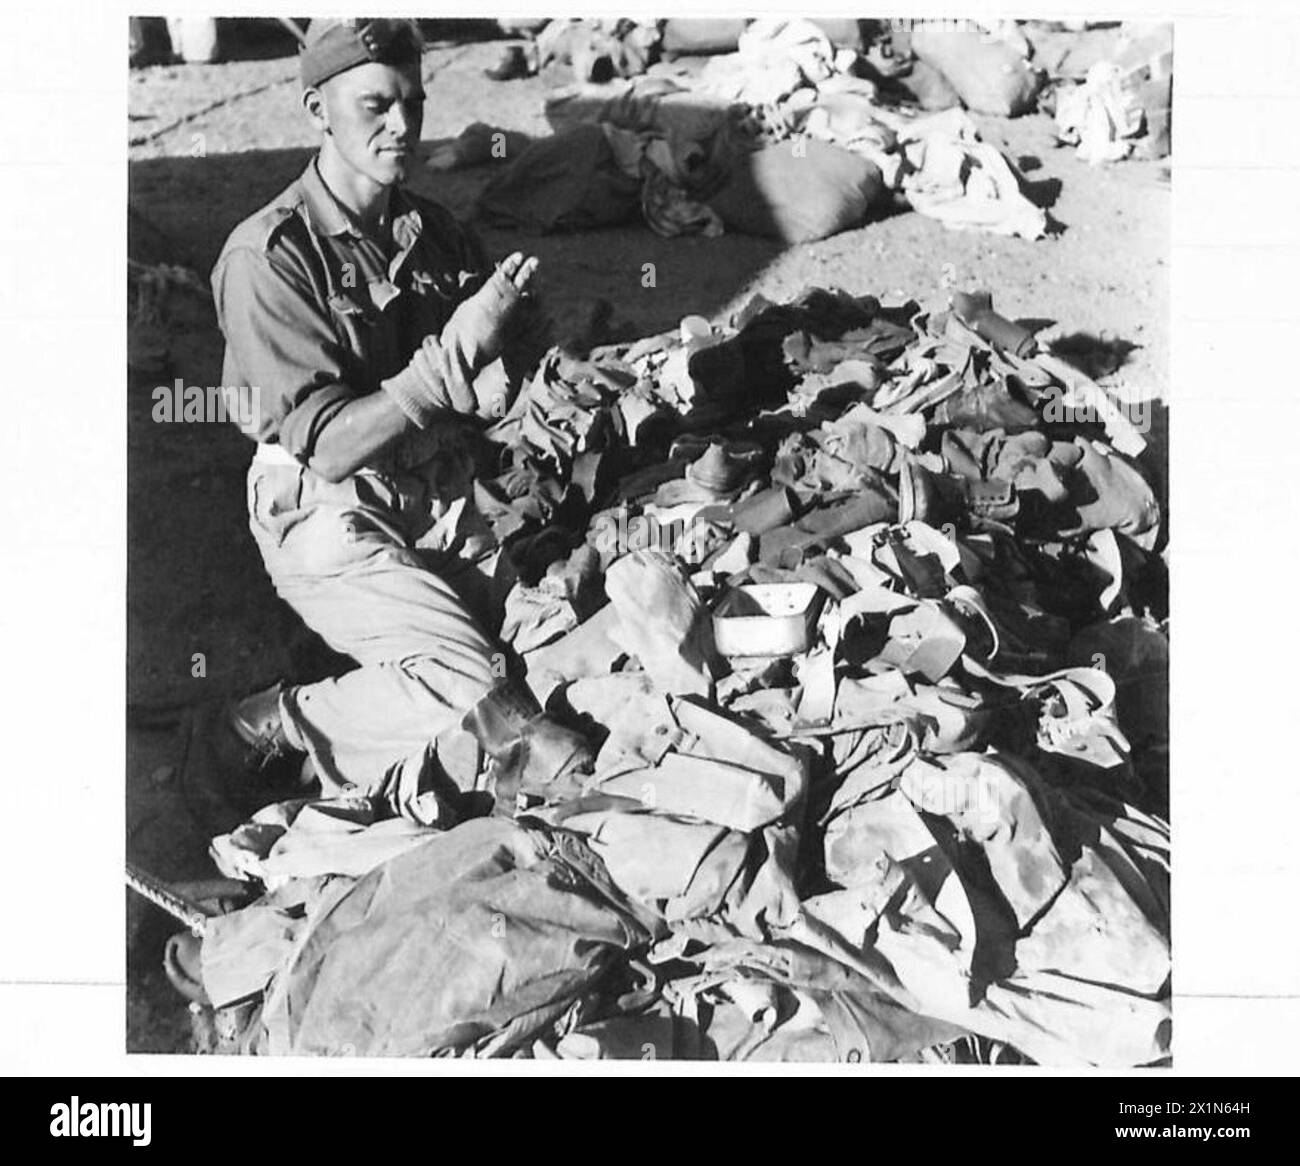 BRITISH EXPEDITIONARY FORCE TO FIGHT LOCUSTS IN THE MIDDLE EAST - From a pile of discarded clothing on the salvage heap, Pte. Moorhouse of Brierfield, Lancs takes a pair of socks and wonders if they could be mended, United Nations Organisation [UNO] Stock Photo